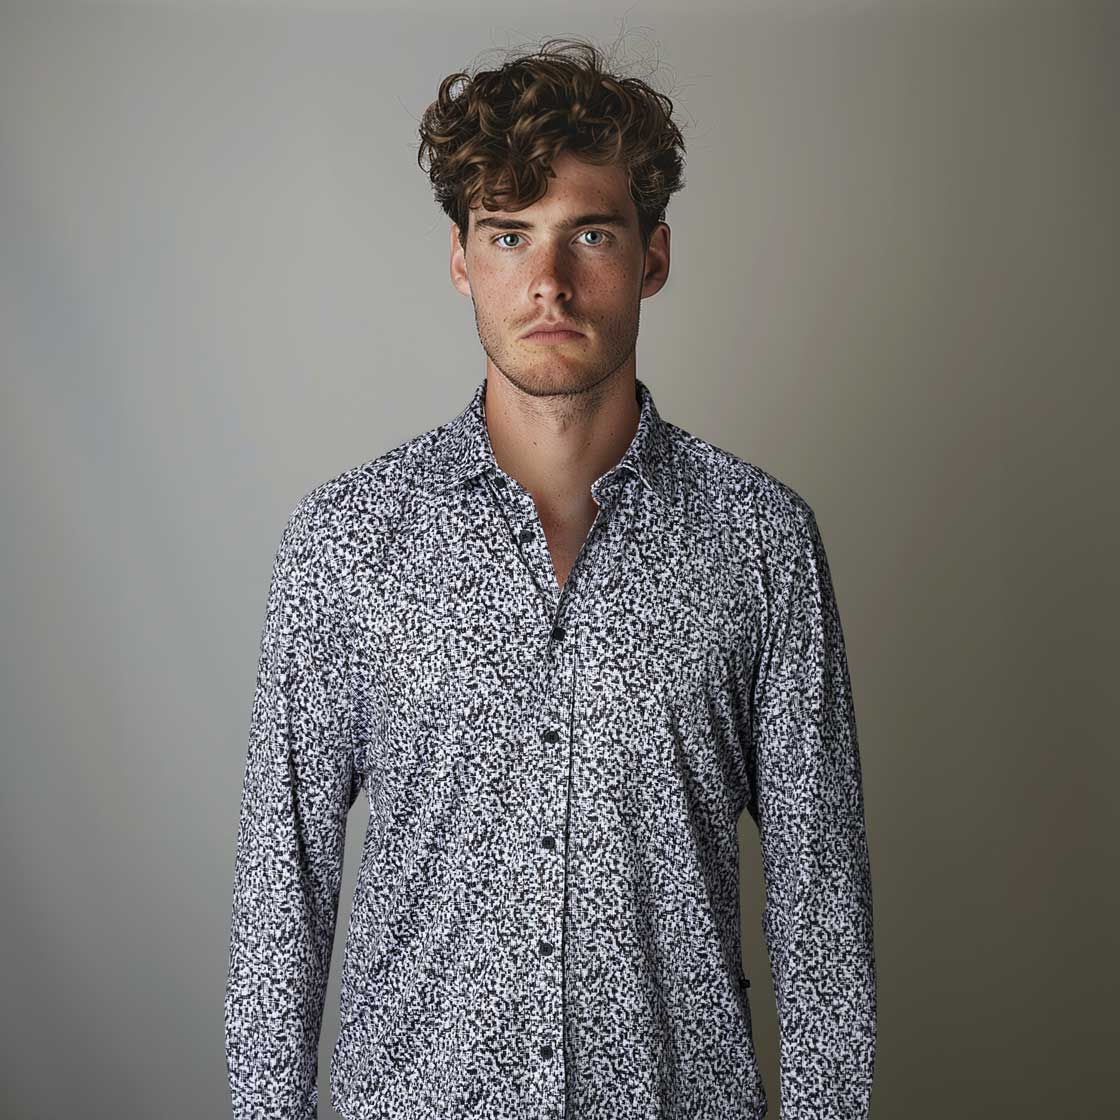 BOSS P Liam Kent C1 234 Shirt in Black and White Model